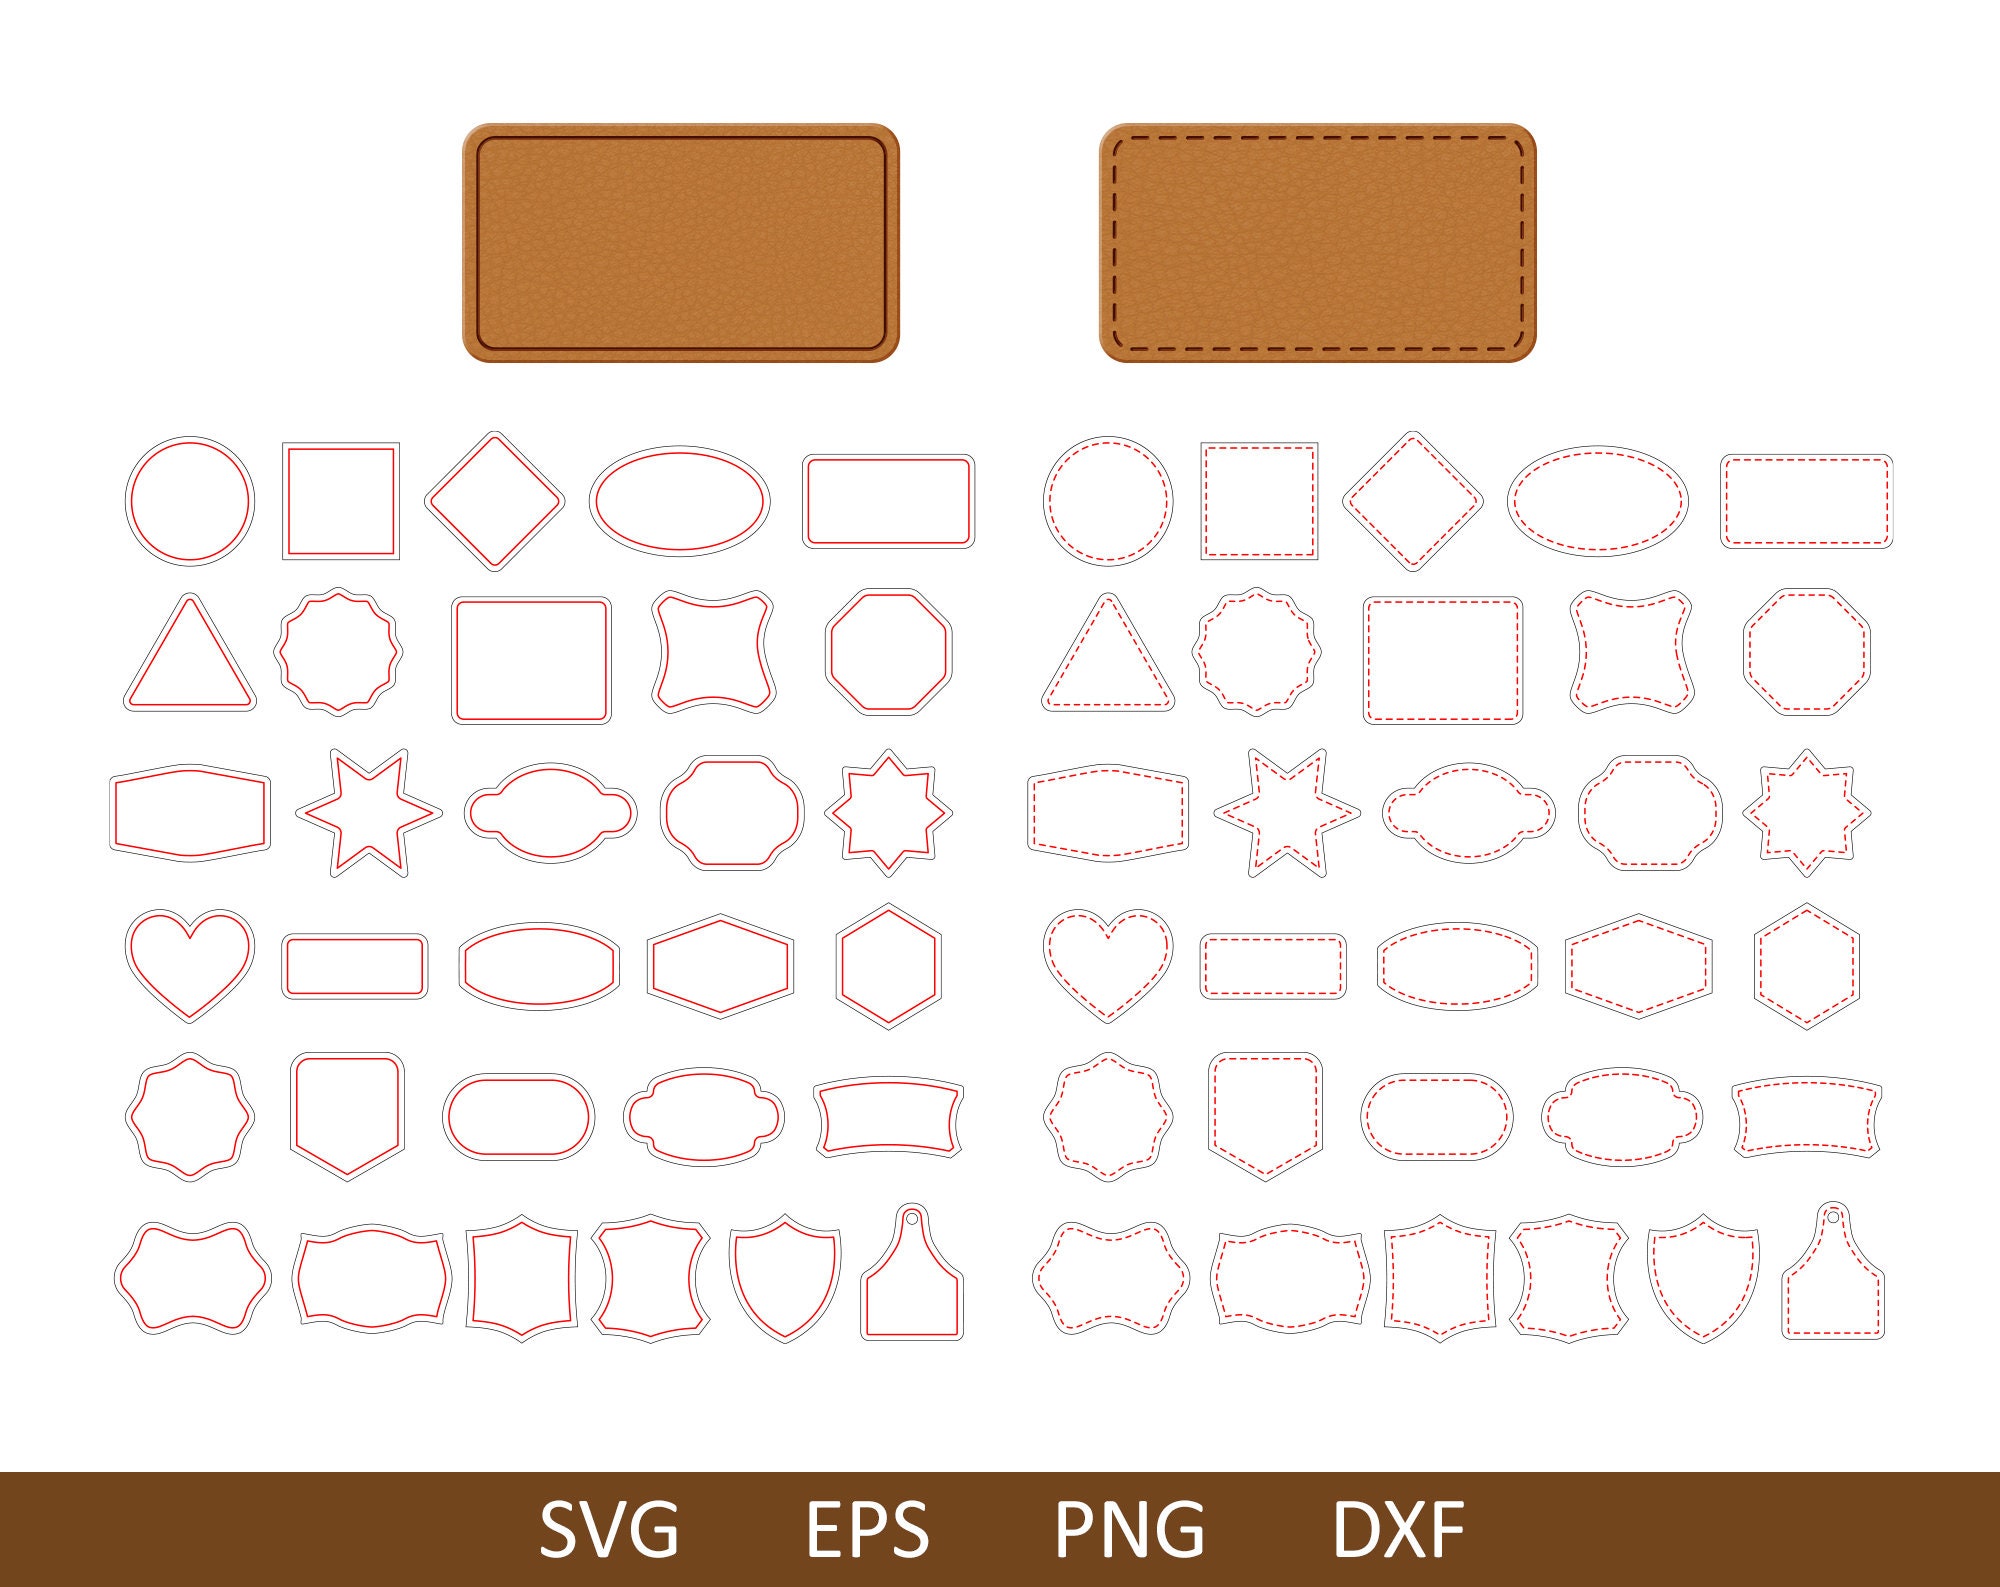 Hat Patch SVG Bundle for Leatherette and Leather. Laser Cut File –  CraftedSupplies